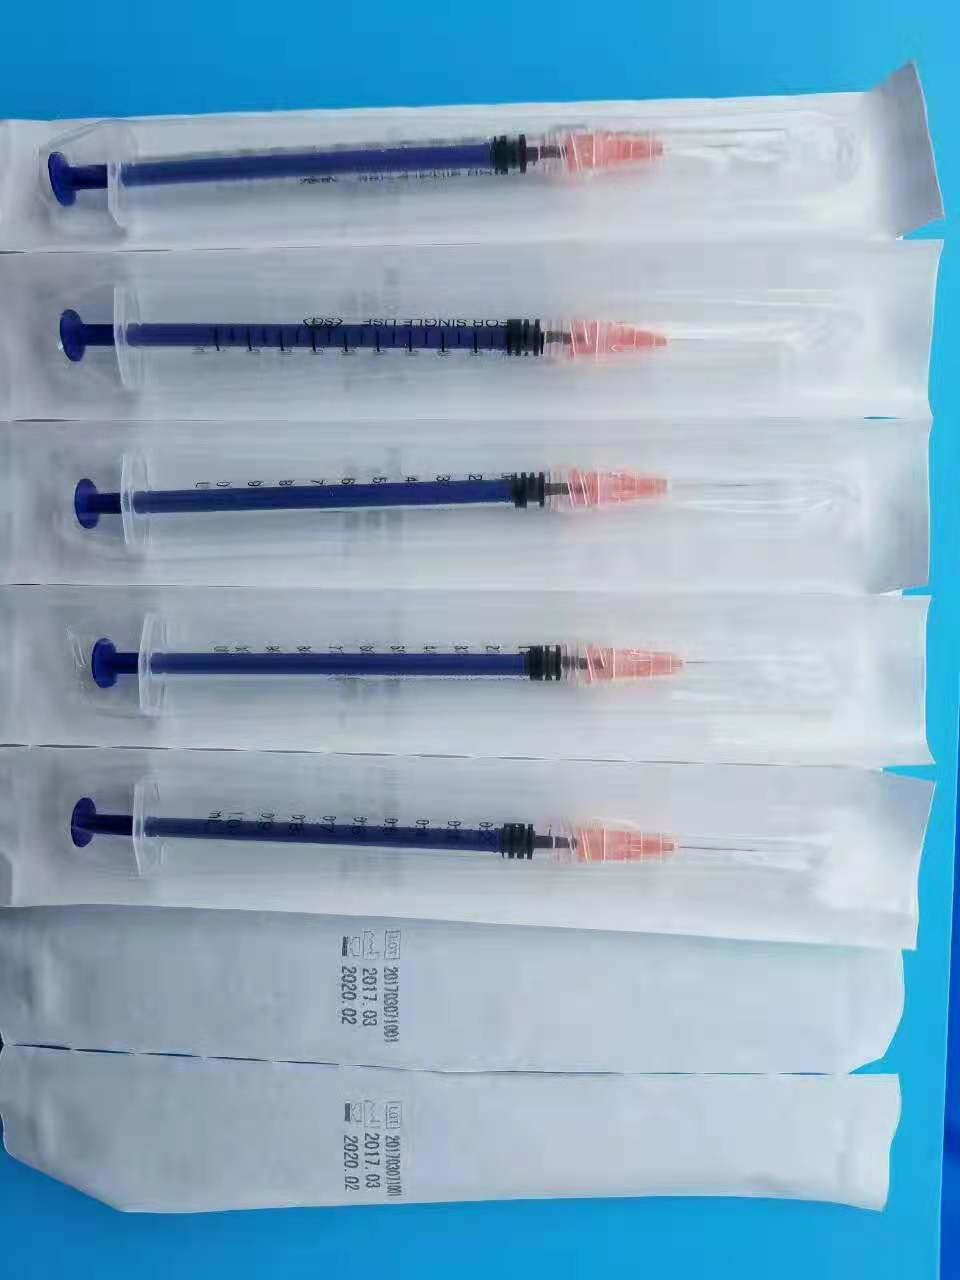 1ml Disposable Syringe Luer Slip with Needle Manufacture with FDA 510K CE&ISO Improved for Vaccine in Stock and Fast Delivery 0.5ml 0.1ml 2ml